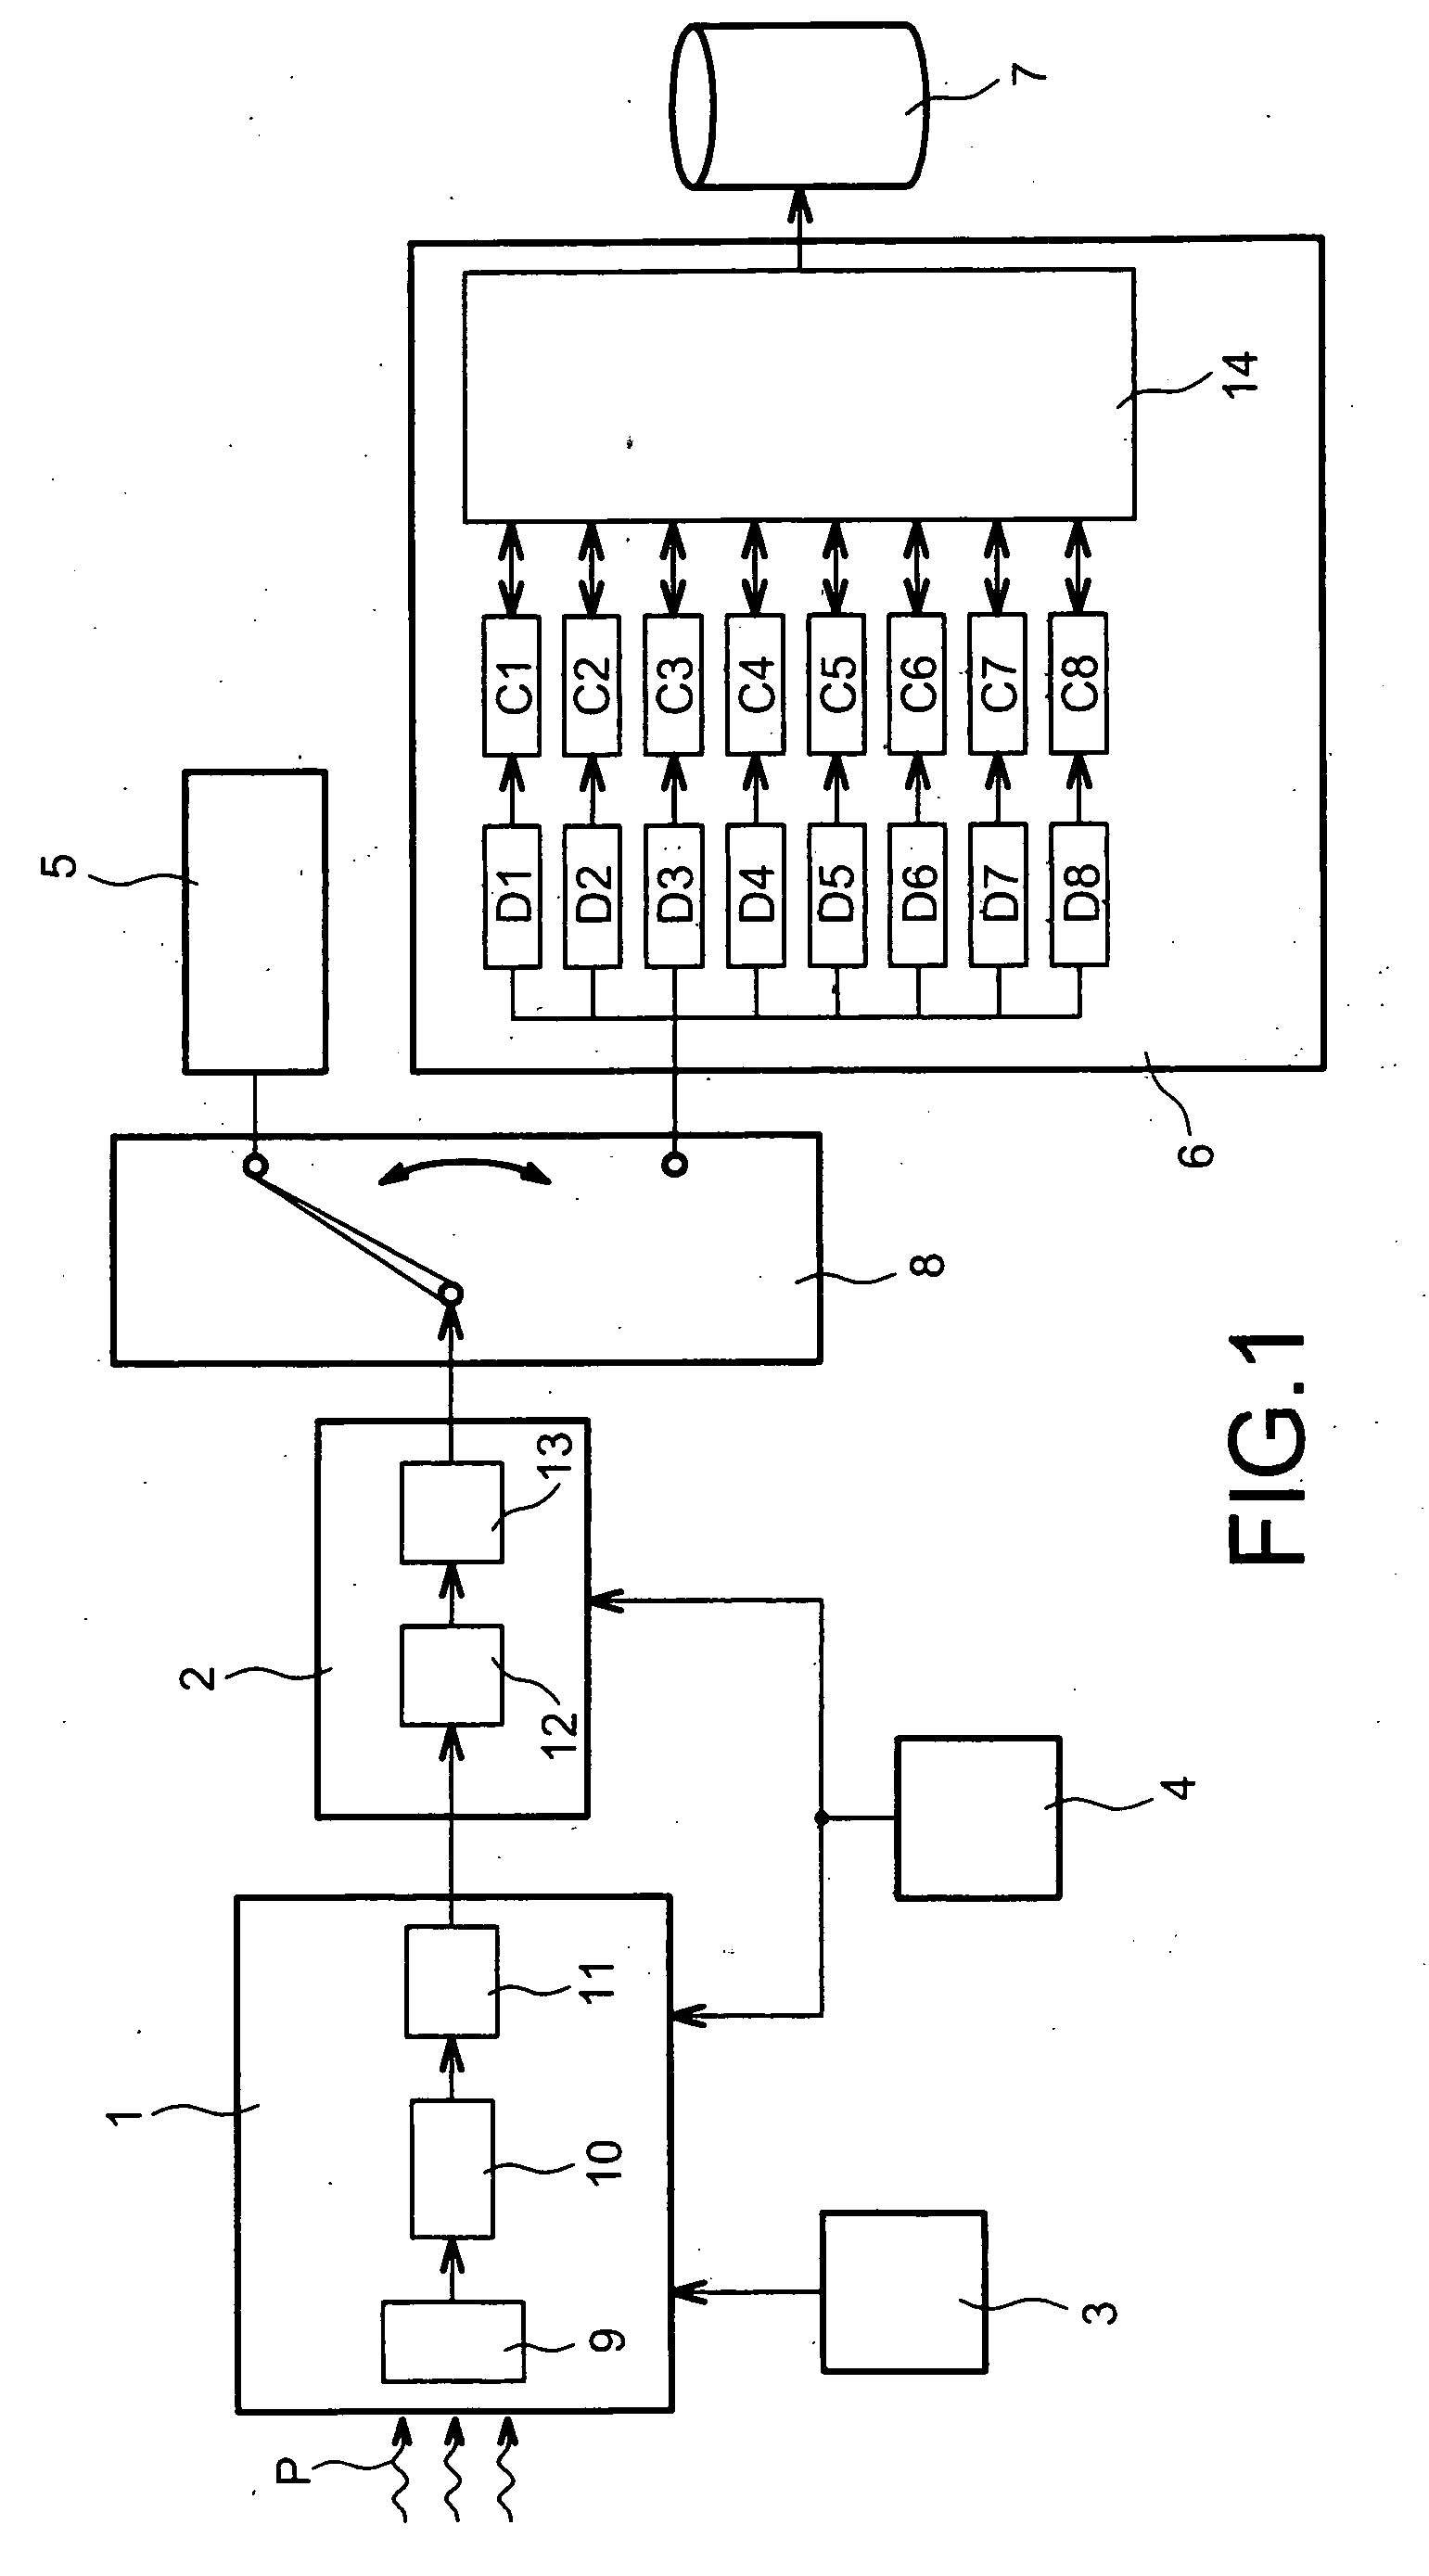 Spectrometry Diagnostic Electronic Circuit and Associated Counting System